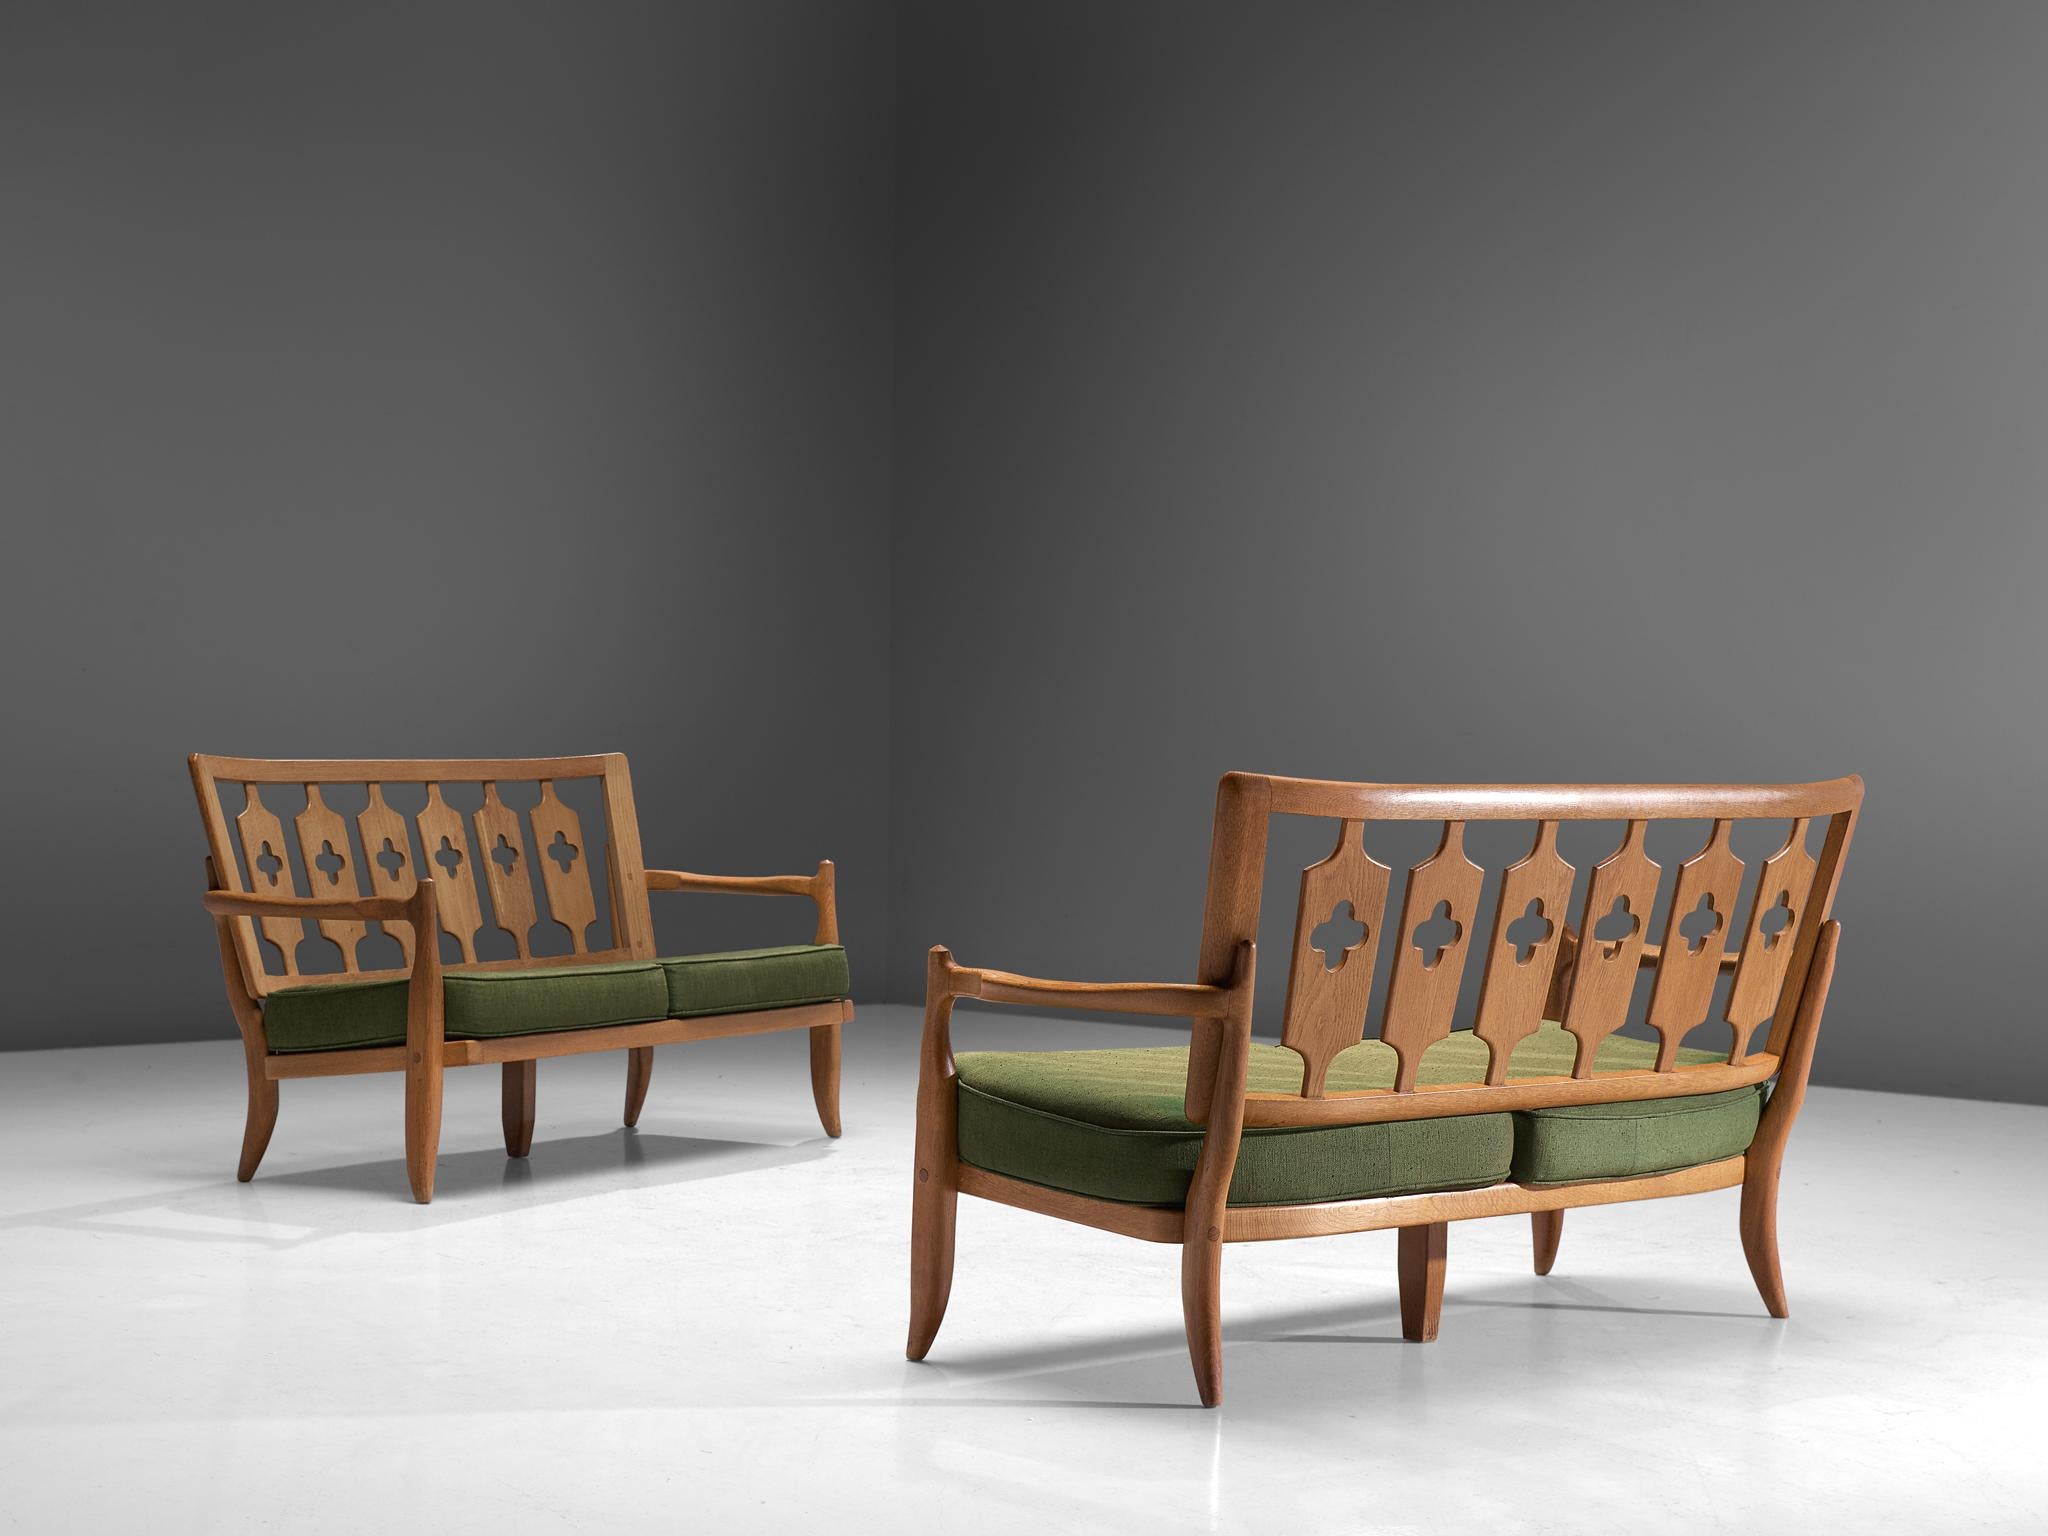 Guillerme et Chambron, pair of sofas, oak and fabric, France, 1960s.

Beautiful two-seat settees by Guillerme and Chambron, in solid oak with the typical characteristic decorative details at the back and sculpted forms of the legs. The thick, green